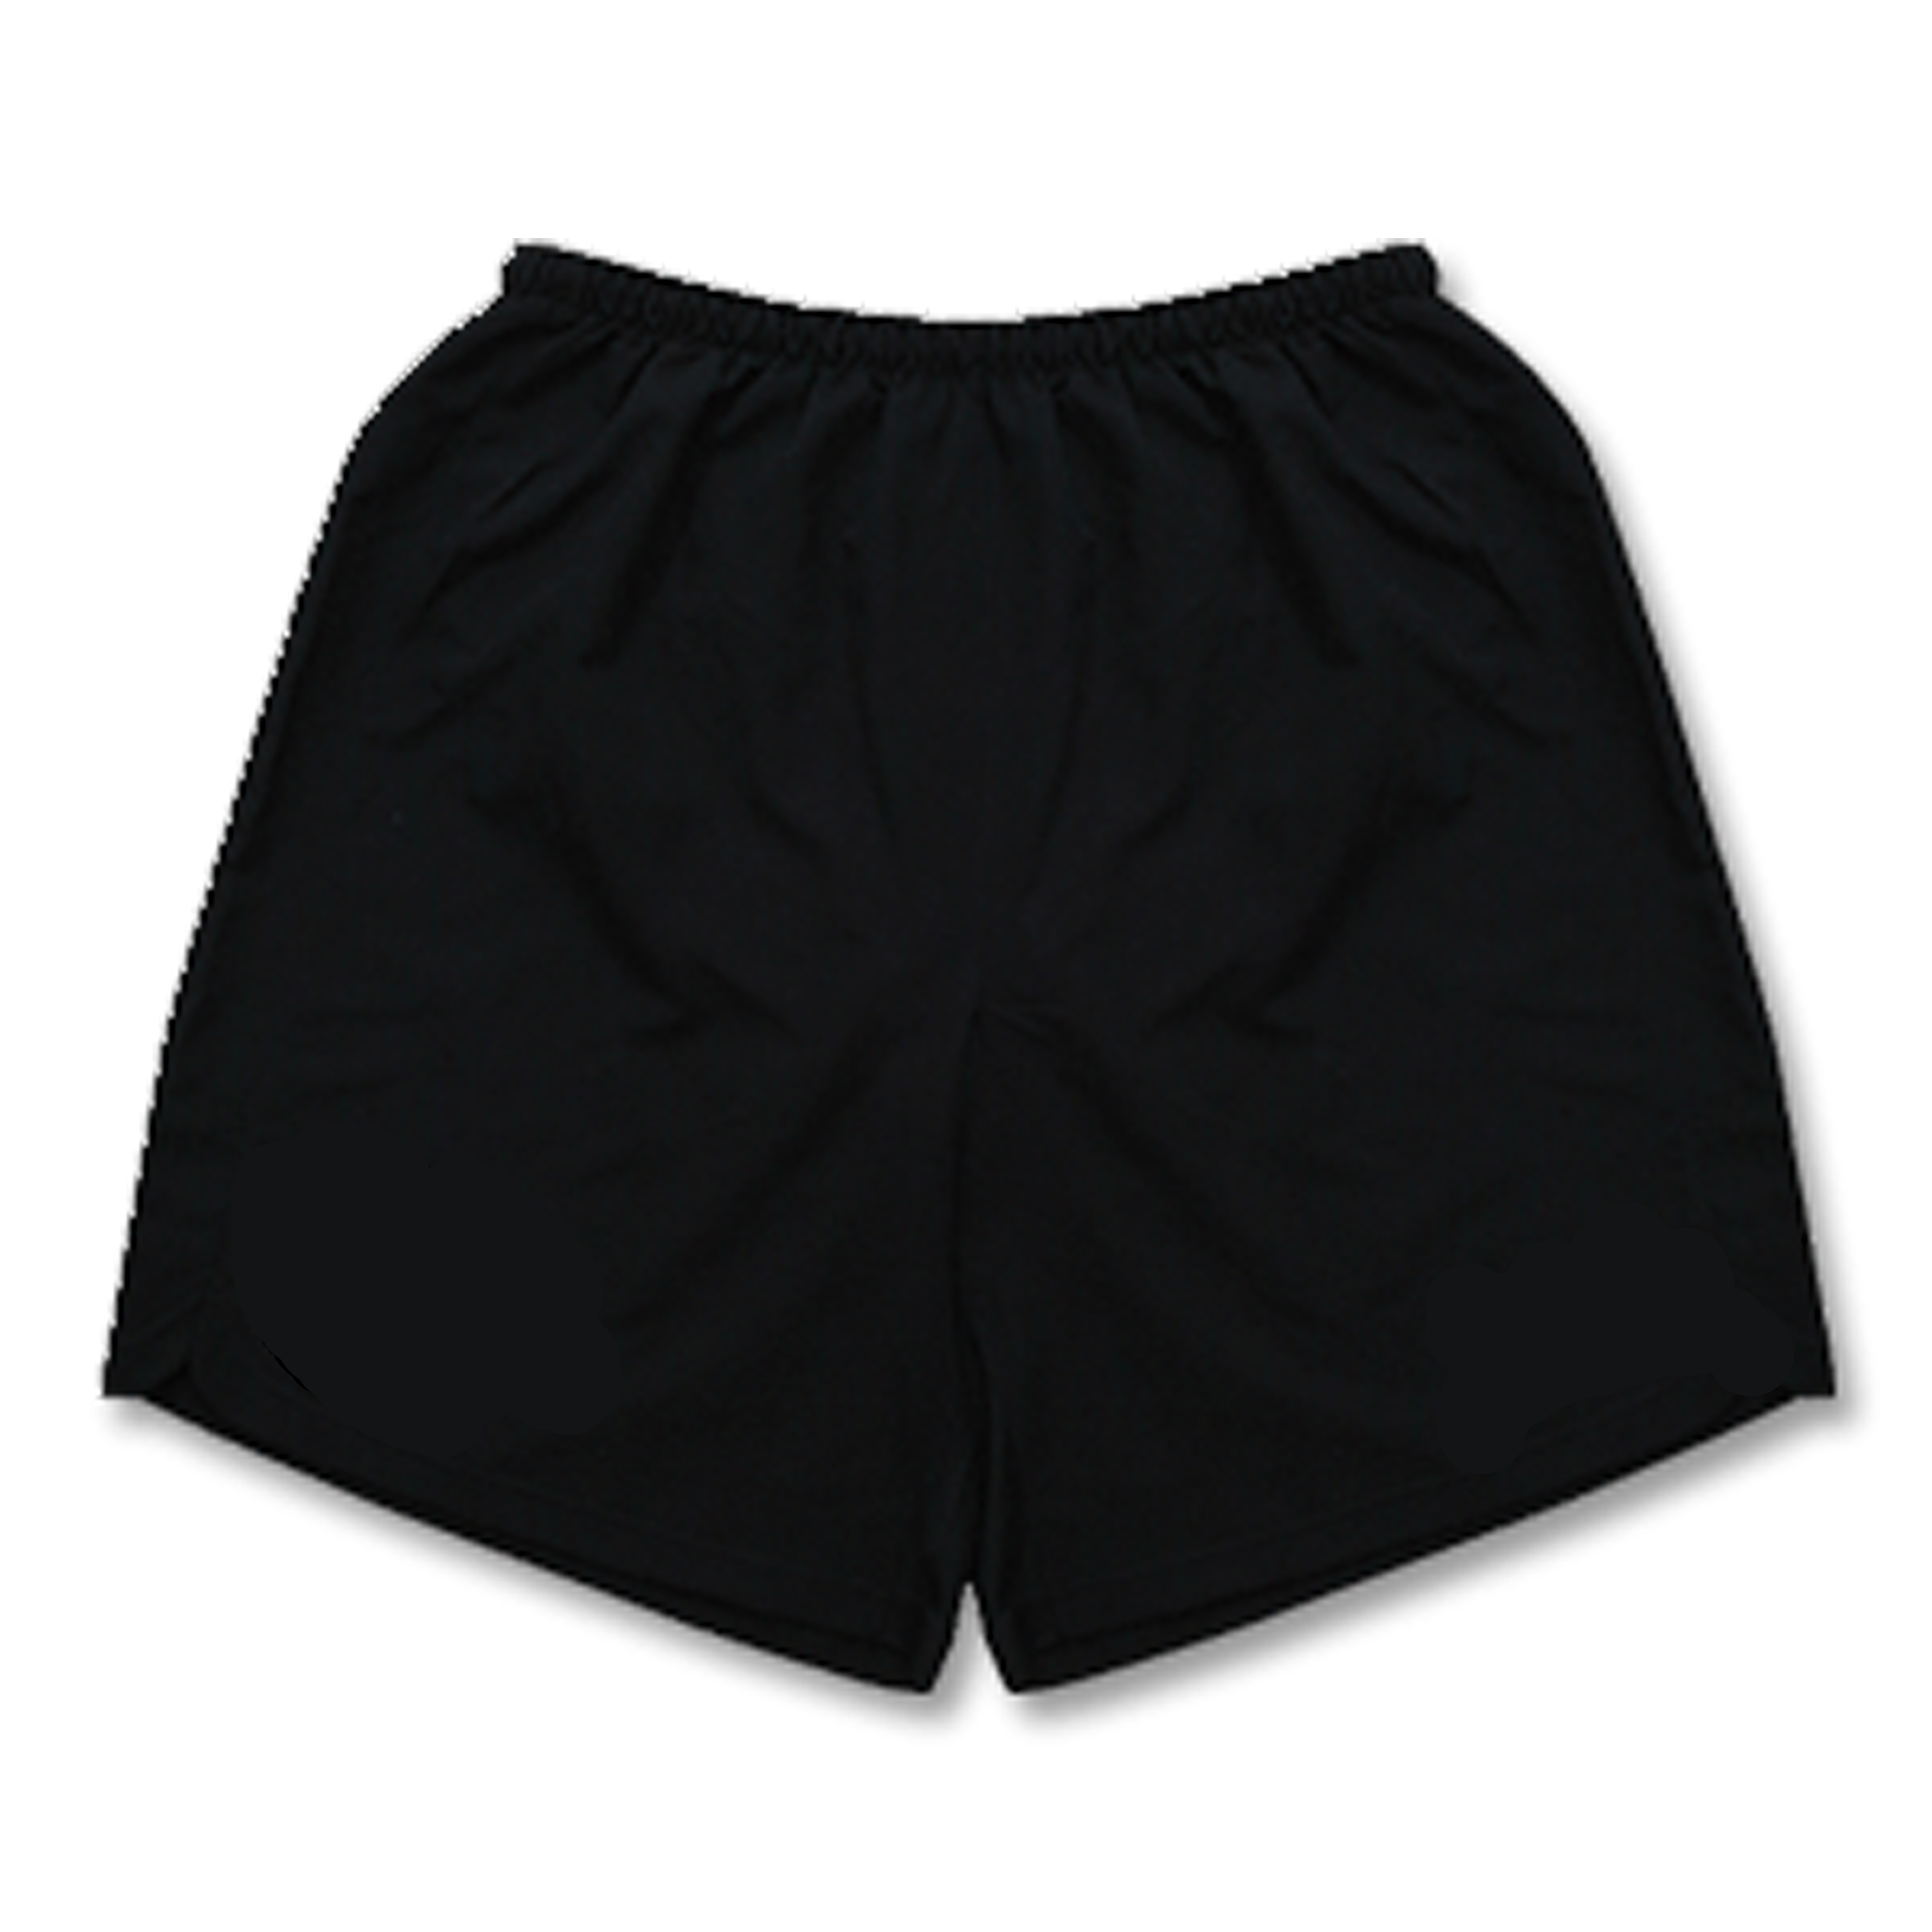 Free Soccer Shorts Cliparts, Download Free Clip Art, Free.